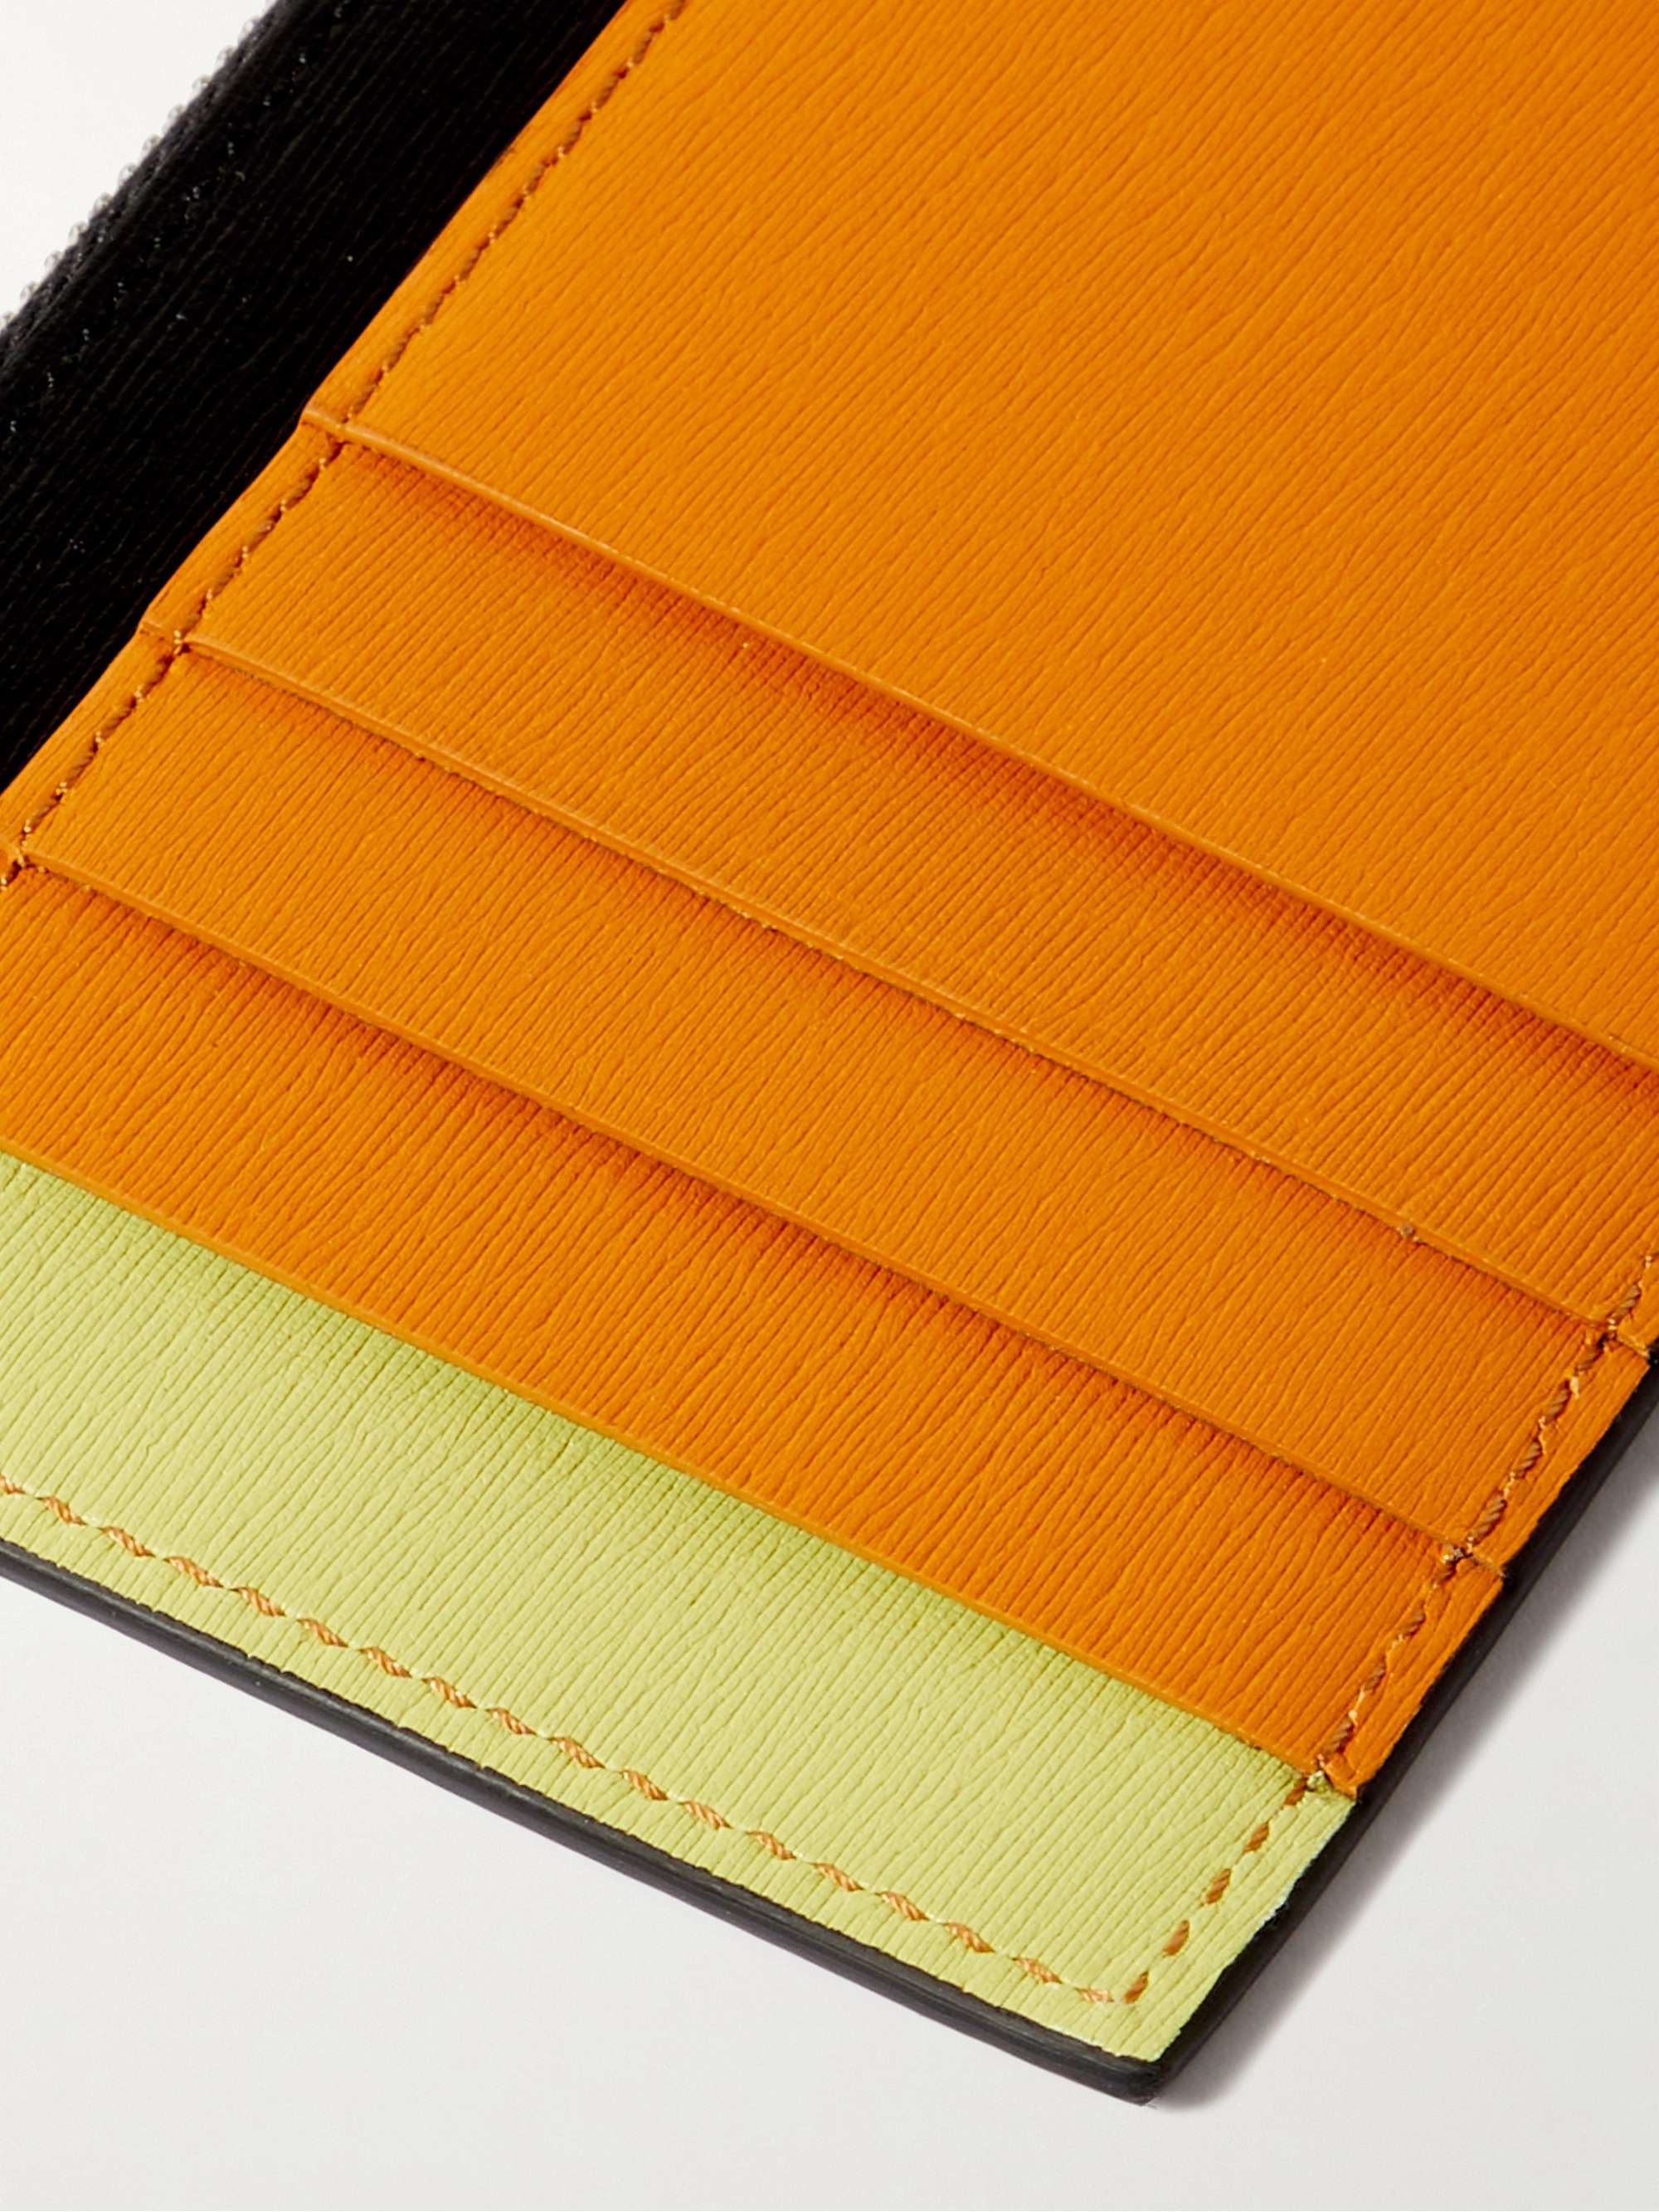 PAUL SMITH Colour-Block Textured-Leather Zipped Wallet